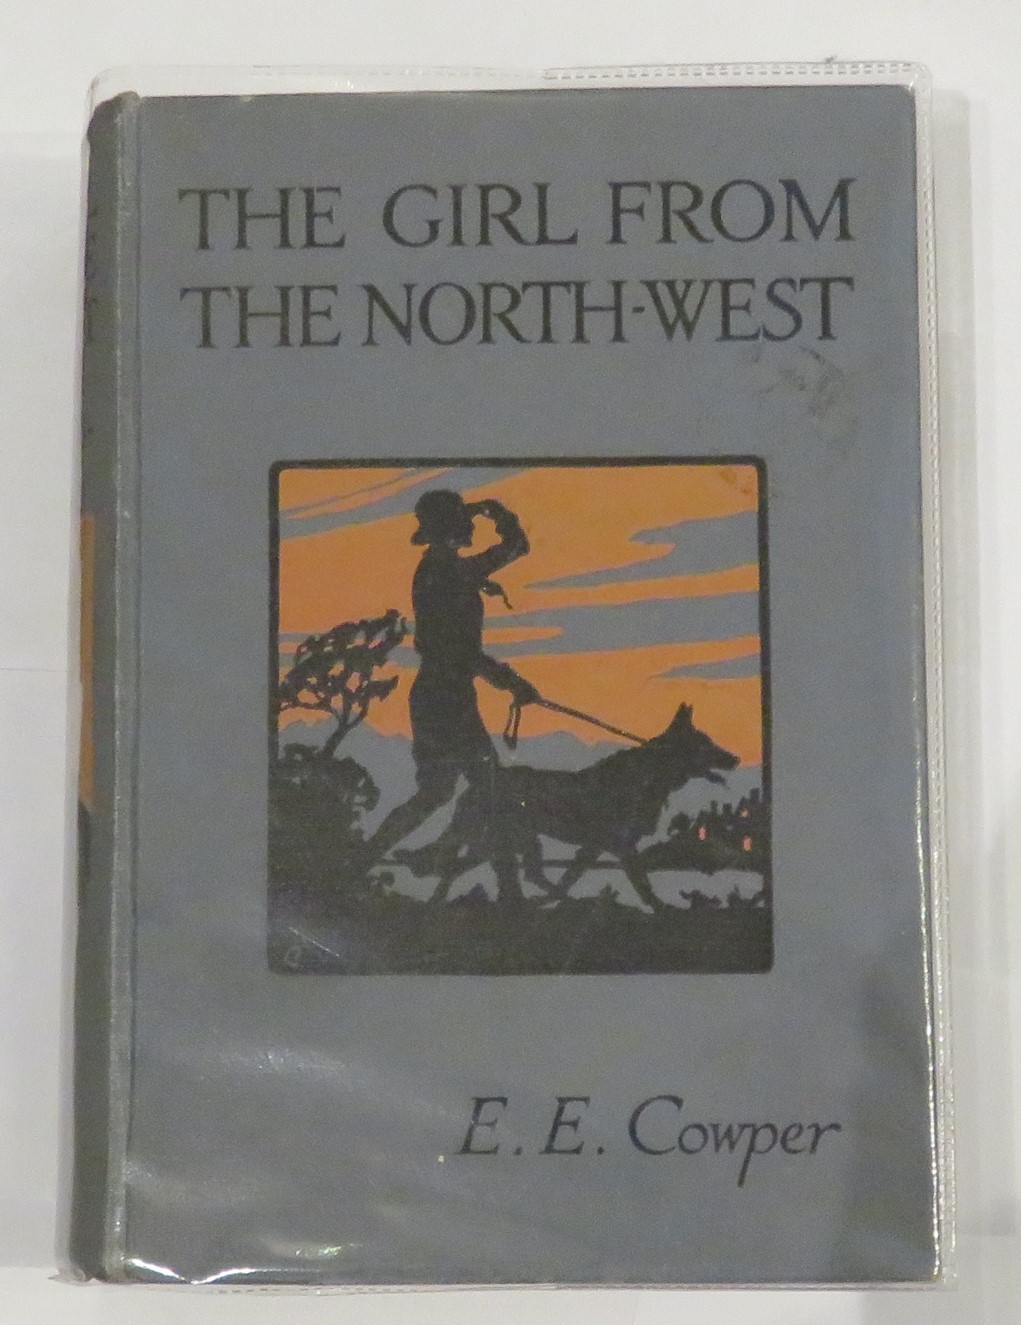 The Girl From The North-West